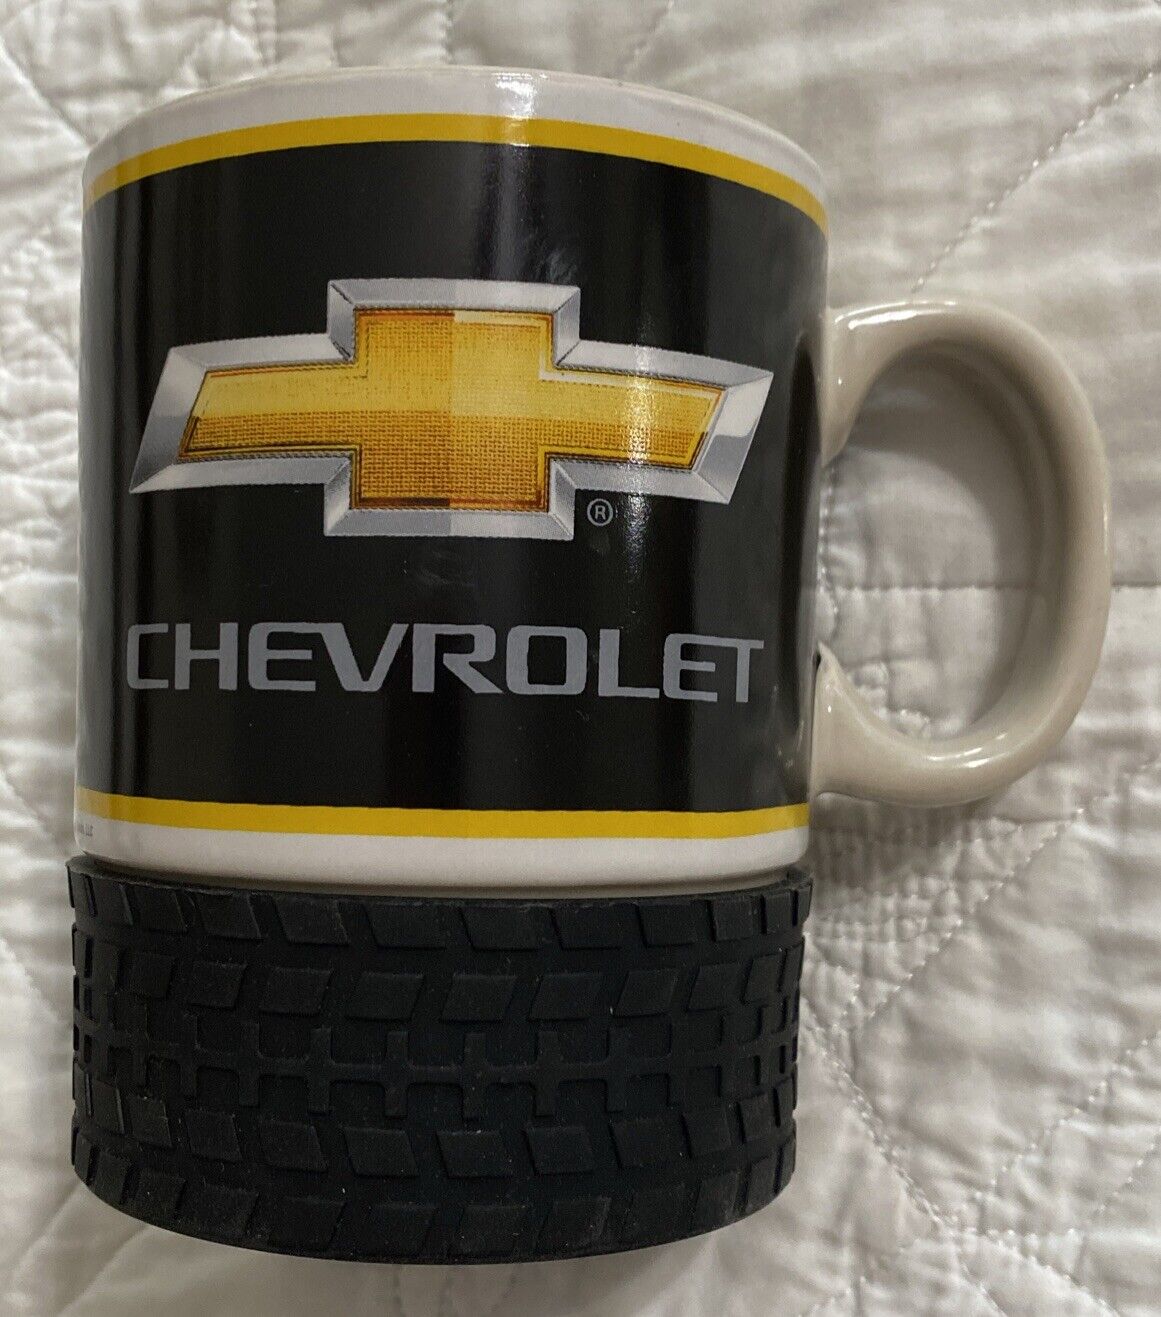 Chevrolet 16oz Coffee Mug W/Rubber Tire Coaster Official Licensed Product